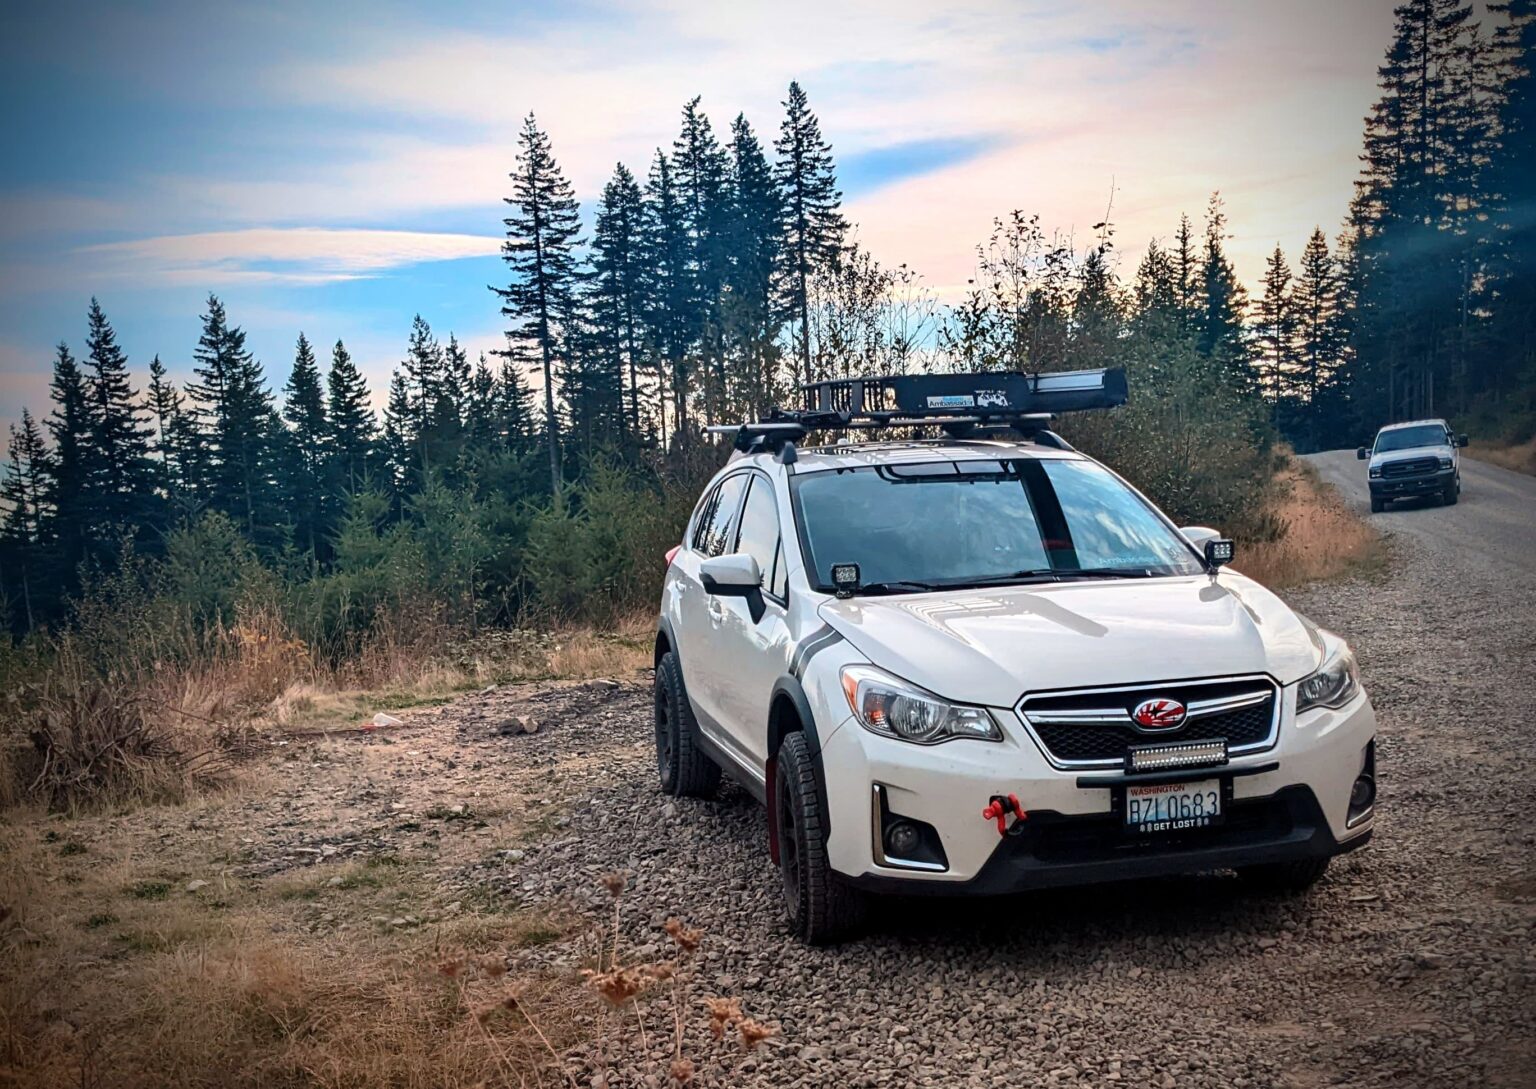 2016 subaru crosstrek lifted with offroad tires and wheels in the forest with lightbar